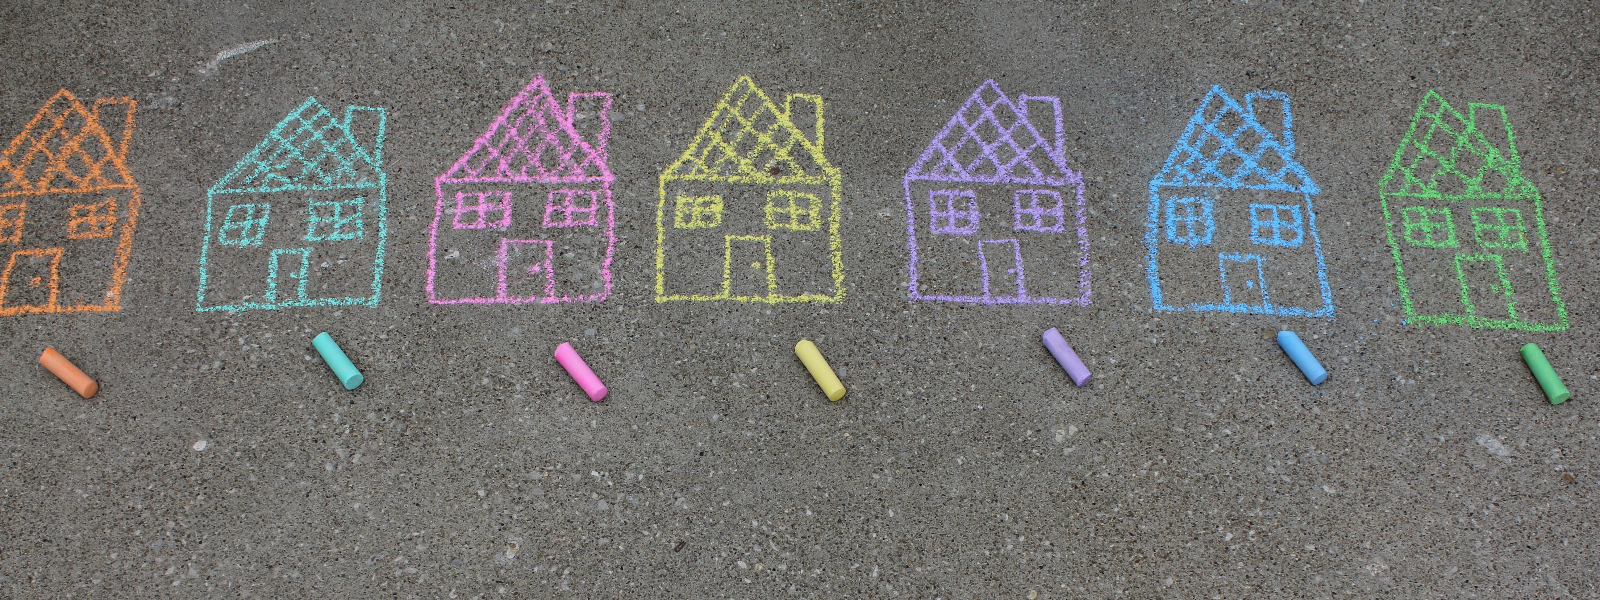 A row of colorful chalk houses, drawn on pavement.